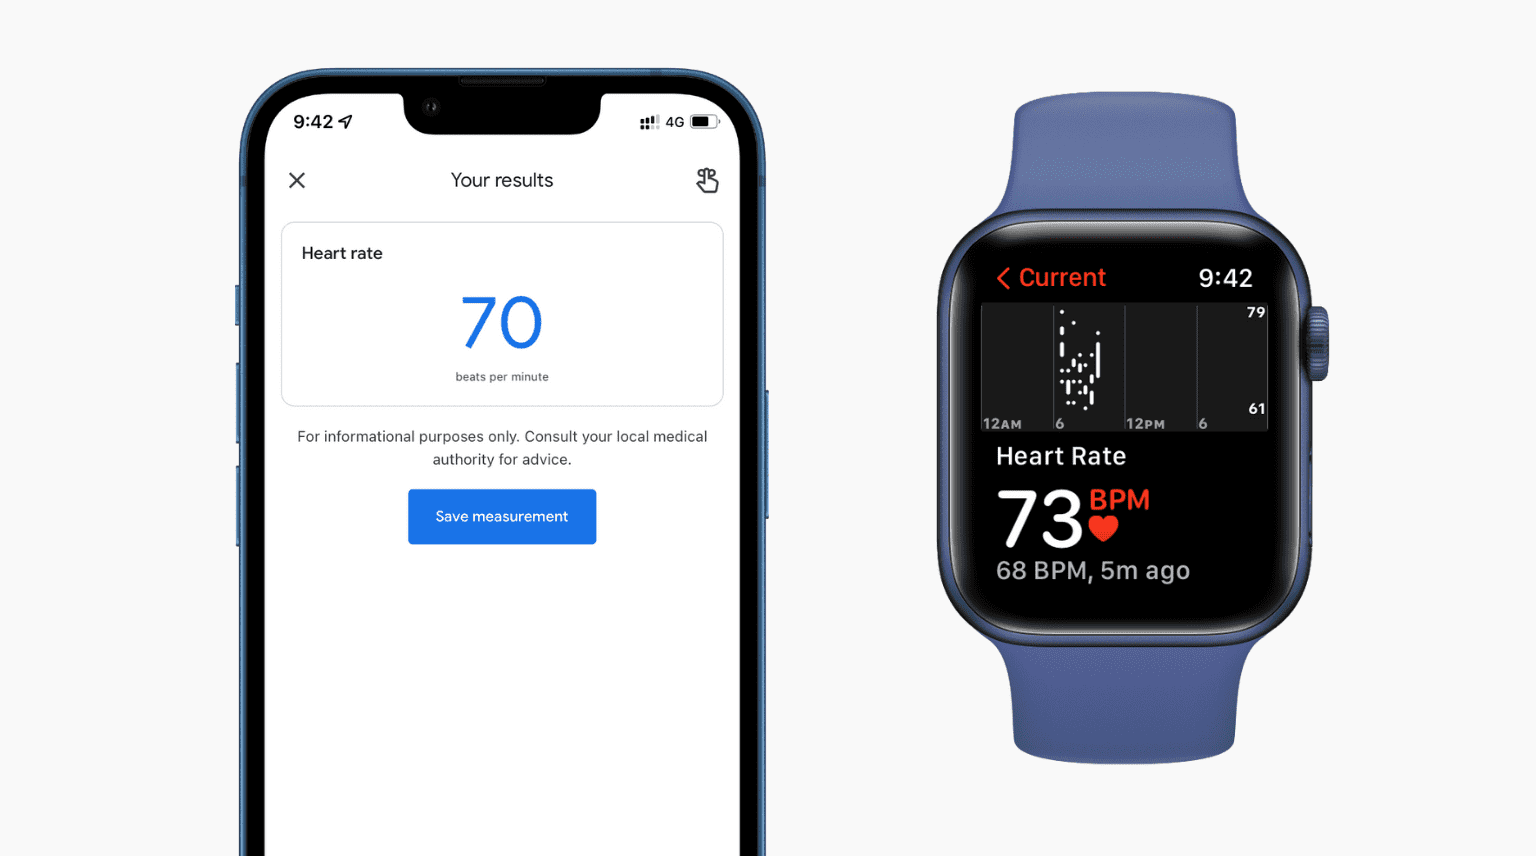 Heart-rate-from-Google-Fit-and-Apple-Watch-9.42-AM